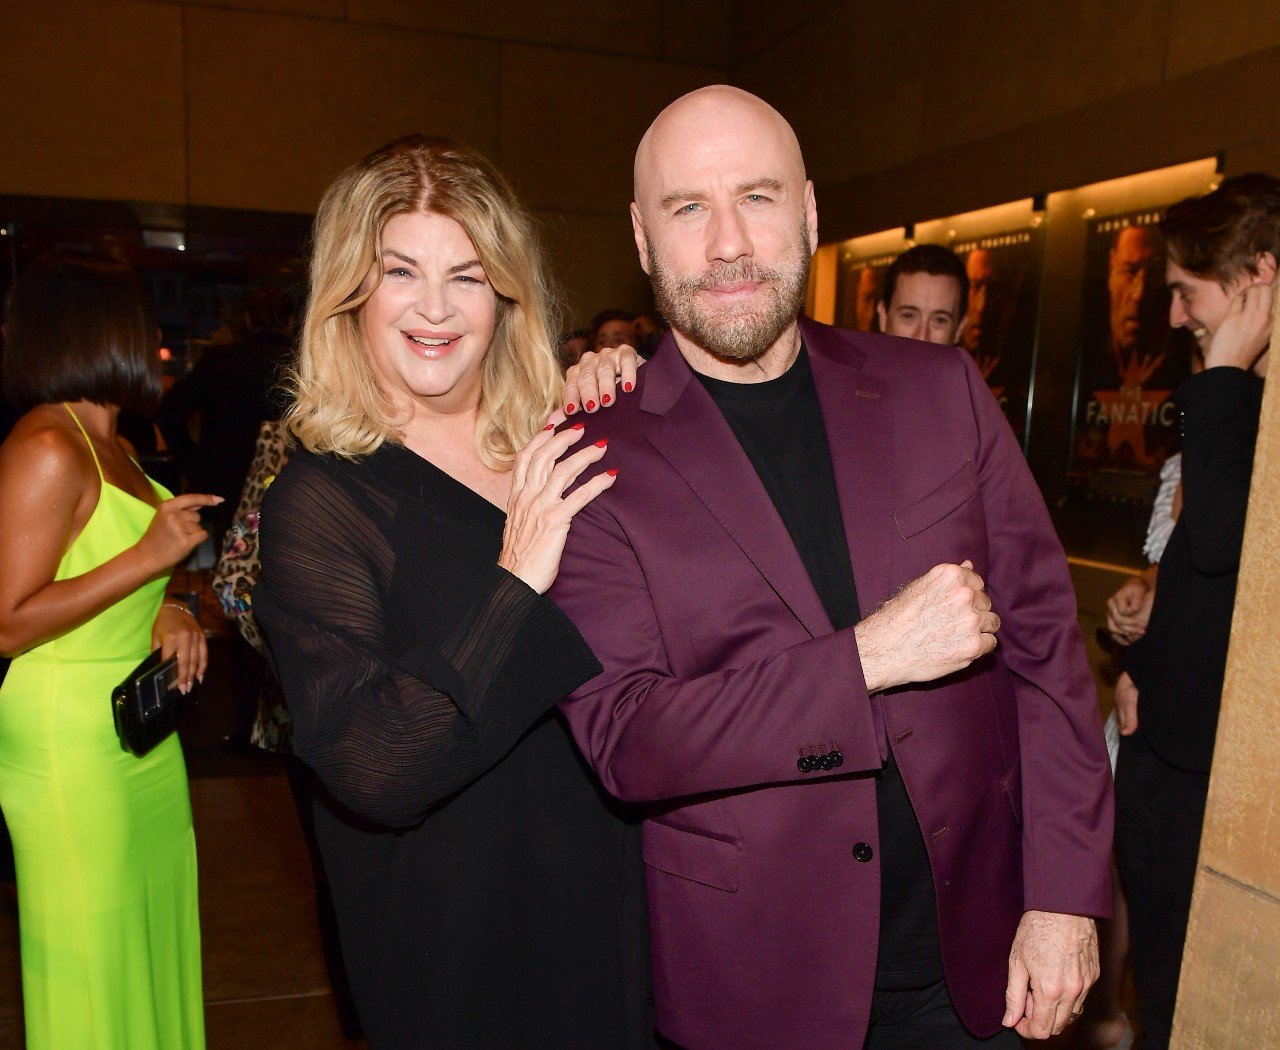 Kirstie Alley and John Travolta stand next to each other at a party. 